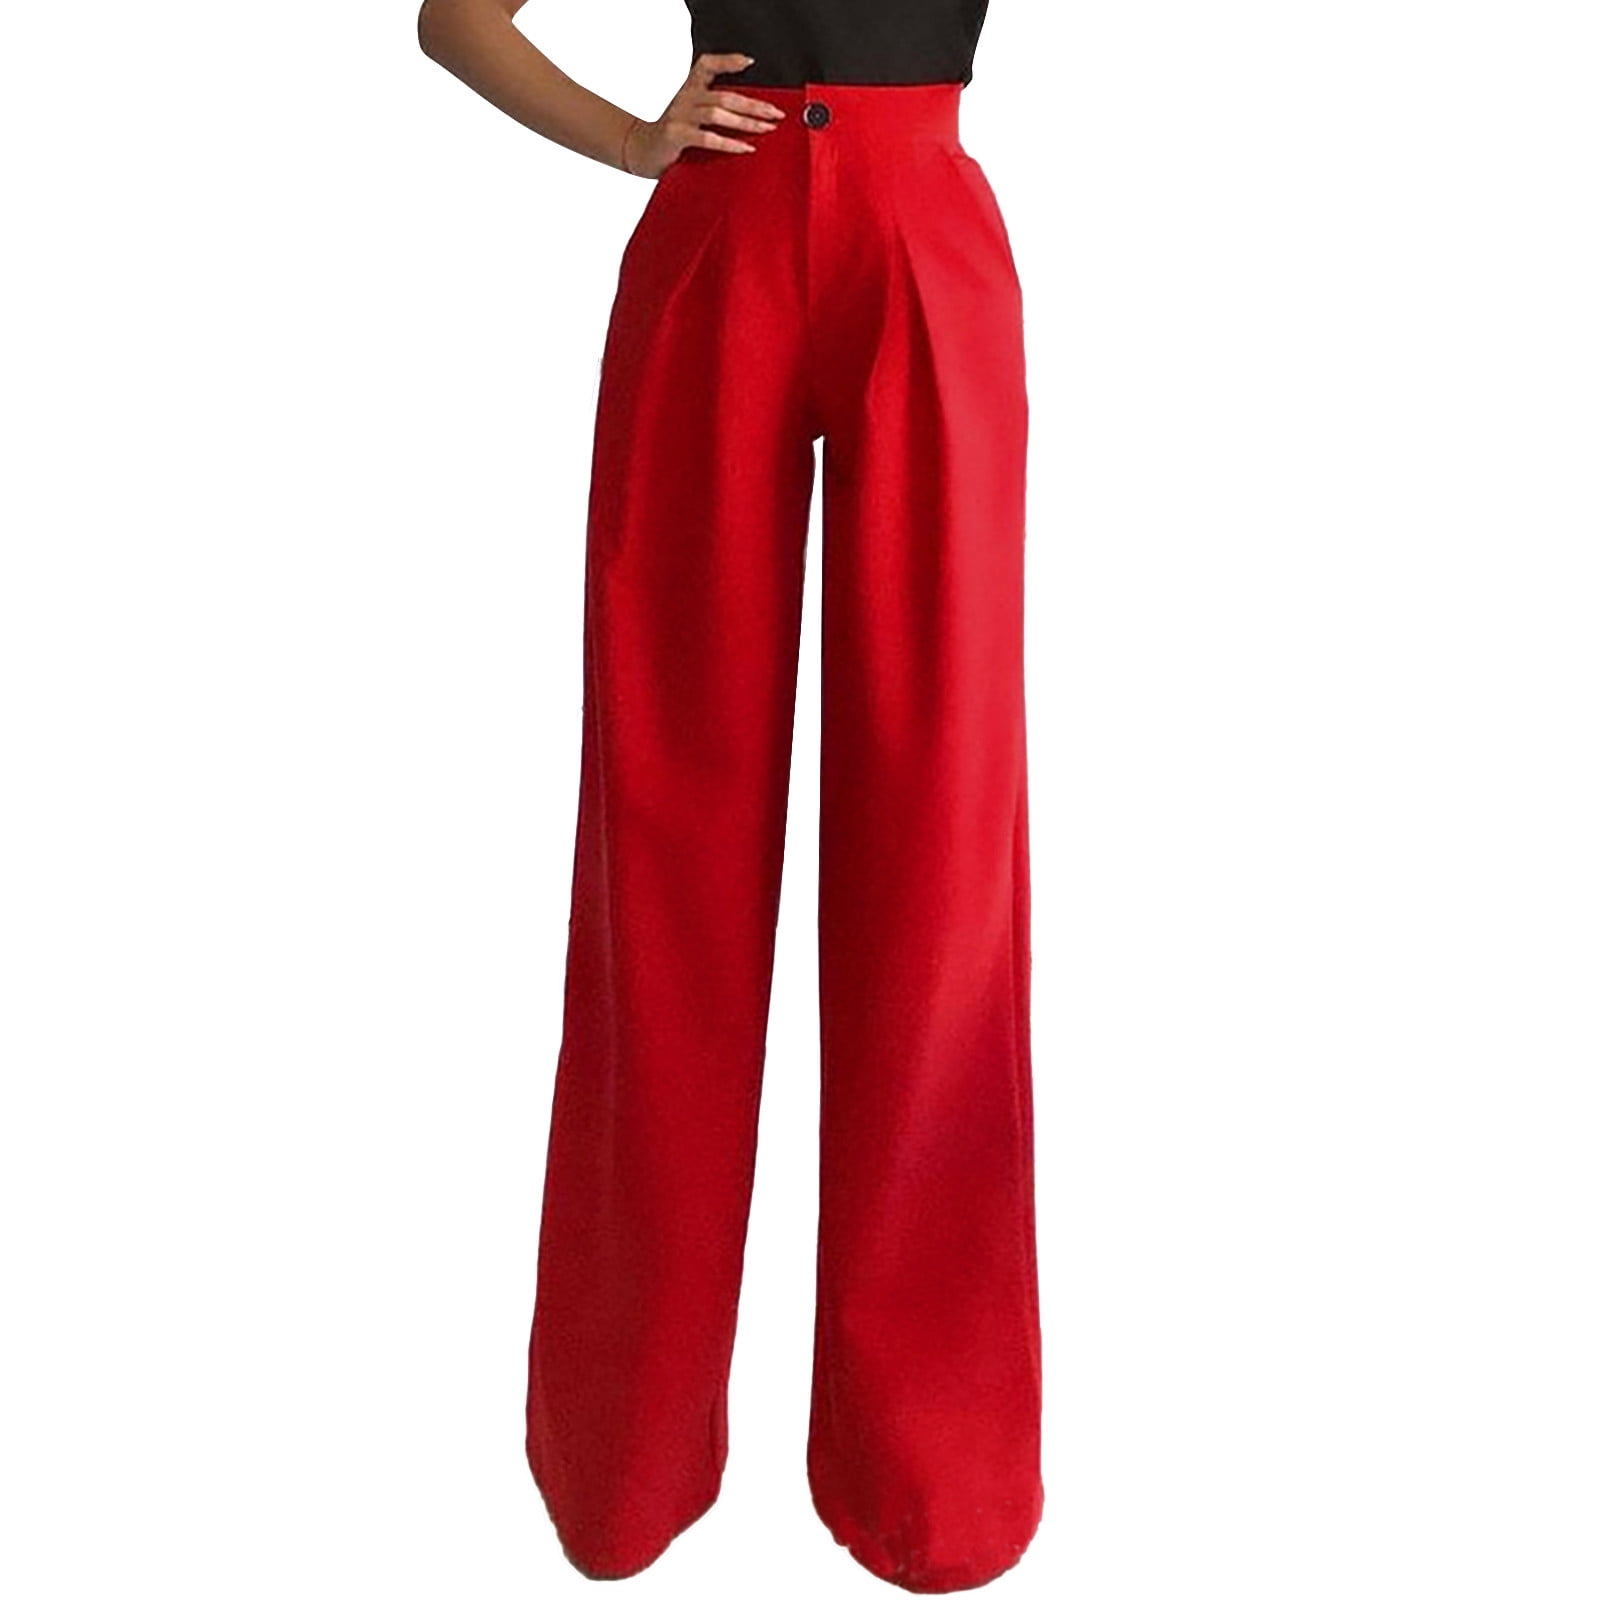 Women's Red High Waisted Palazzo Pants, Women's Jersey Knit Pants, Wide Leg  Stretch Pants, Baggy Pants, Red Dress Pants, Wide Leg Yoga Pants -   Canada